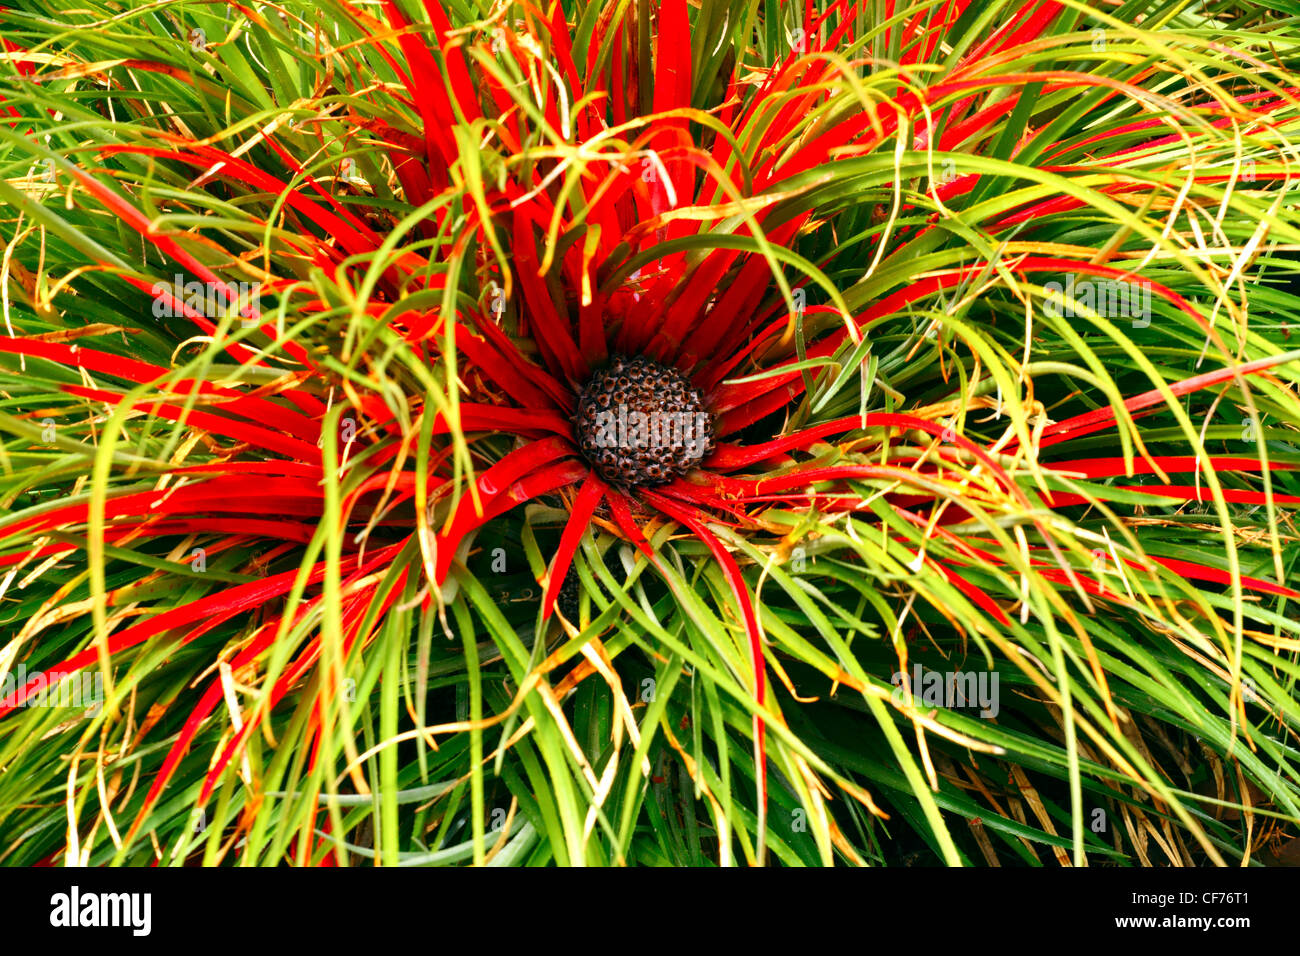 Bright red fiery flower head plant Stock Photo